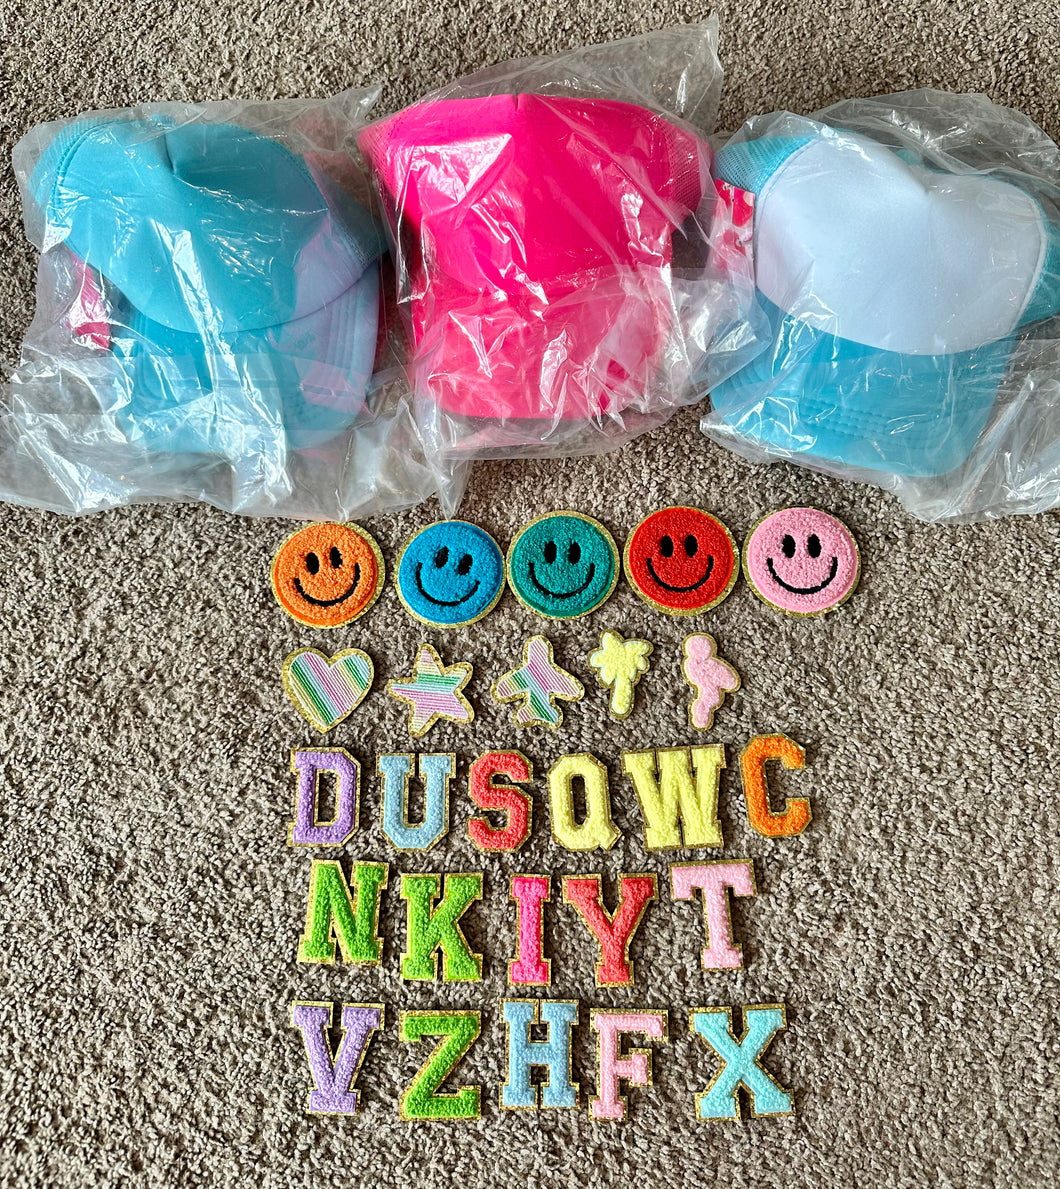 NEW!! Make your own hats!! Letters and smiley faces included!!  One Size